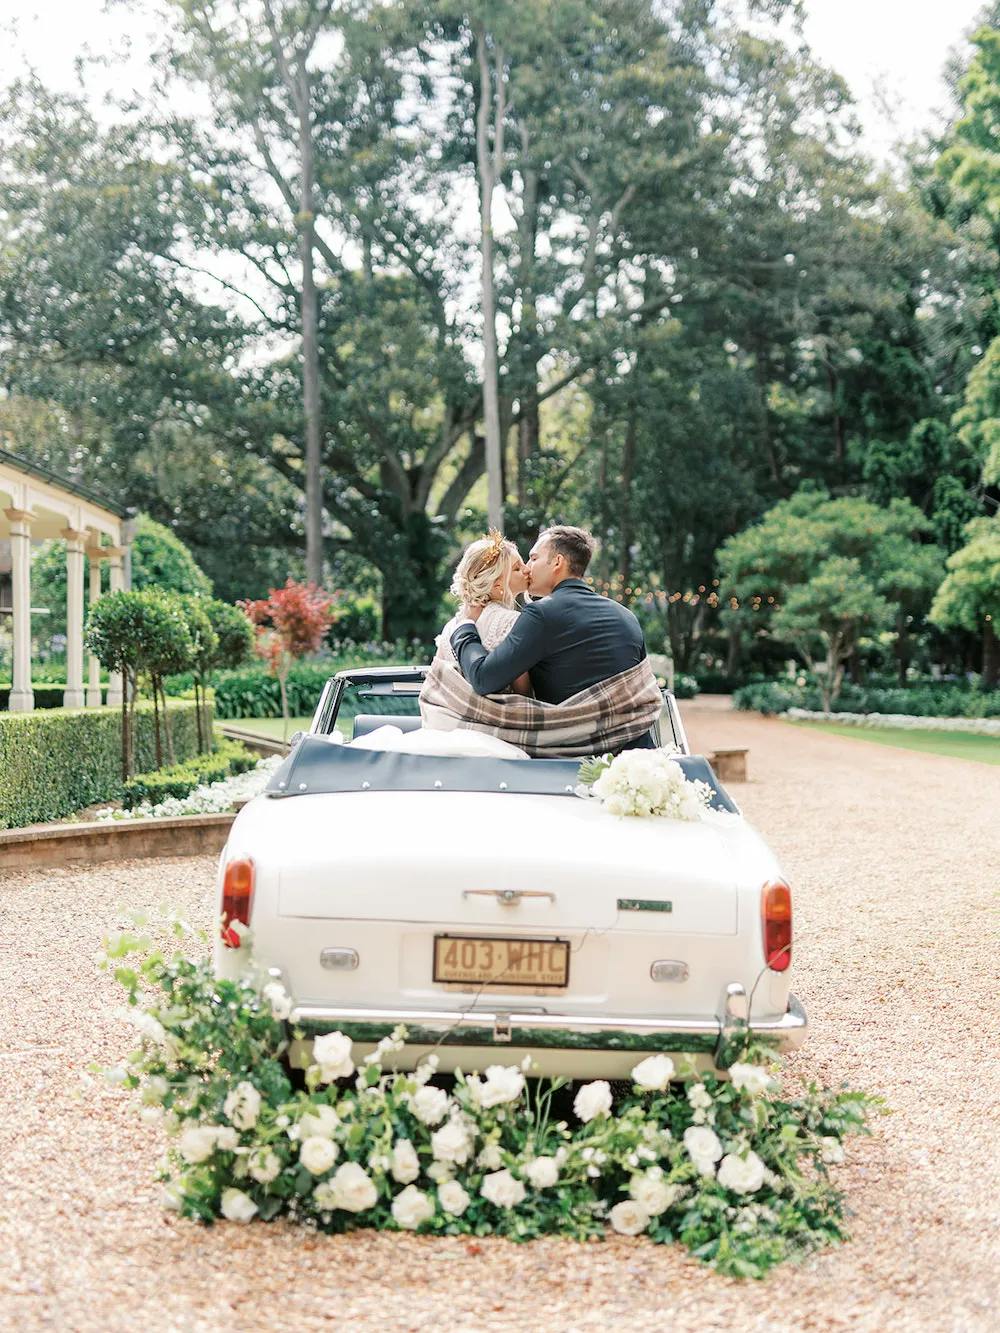 A couple sits on the back of a white convertible decorated with white flowers, sharing a romantic kiss. The car is parked on a gravel path in a lush garden, with tall trees and greenery in the background. The couple is wrapped in a blanket, adding to the intimate moment.